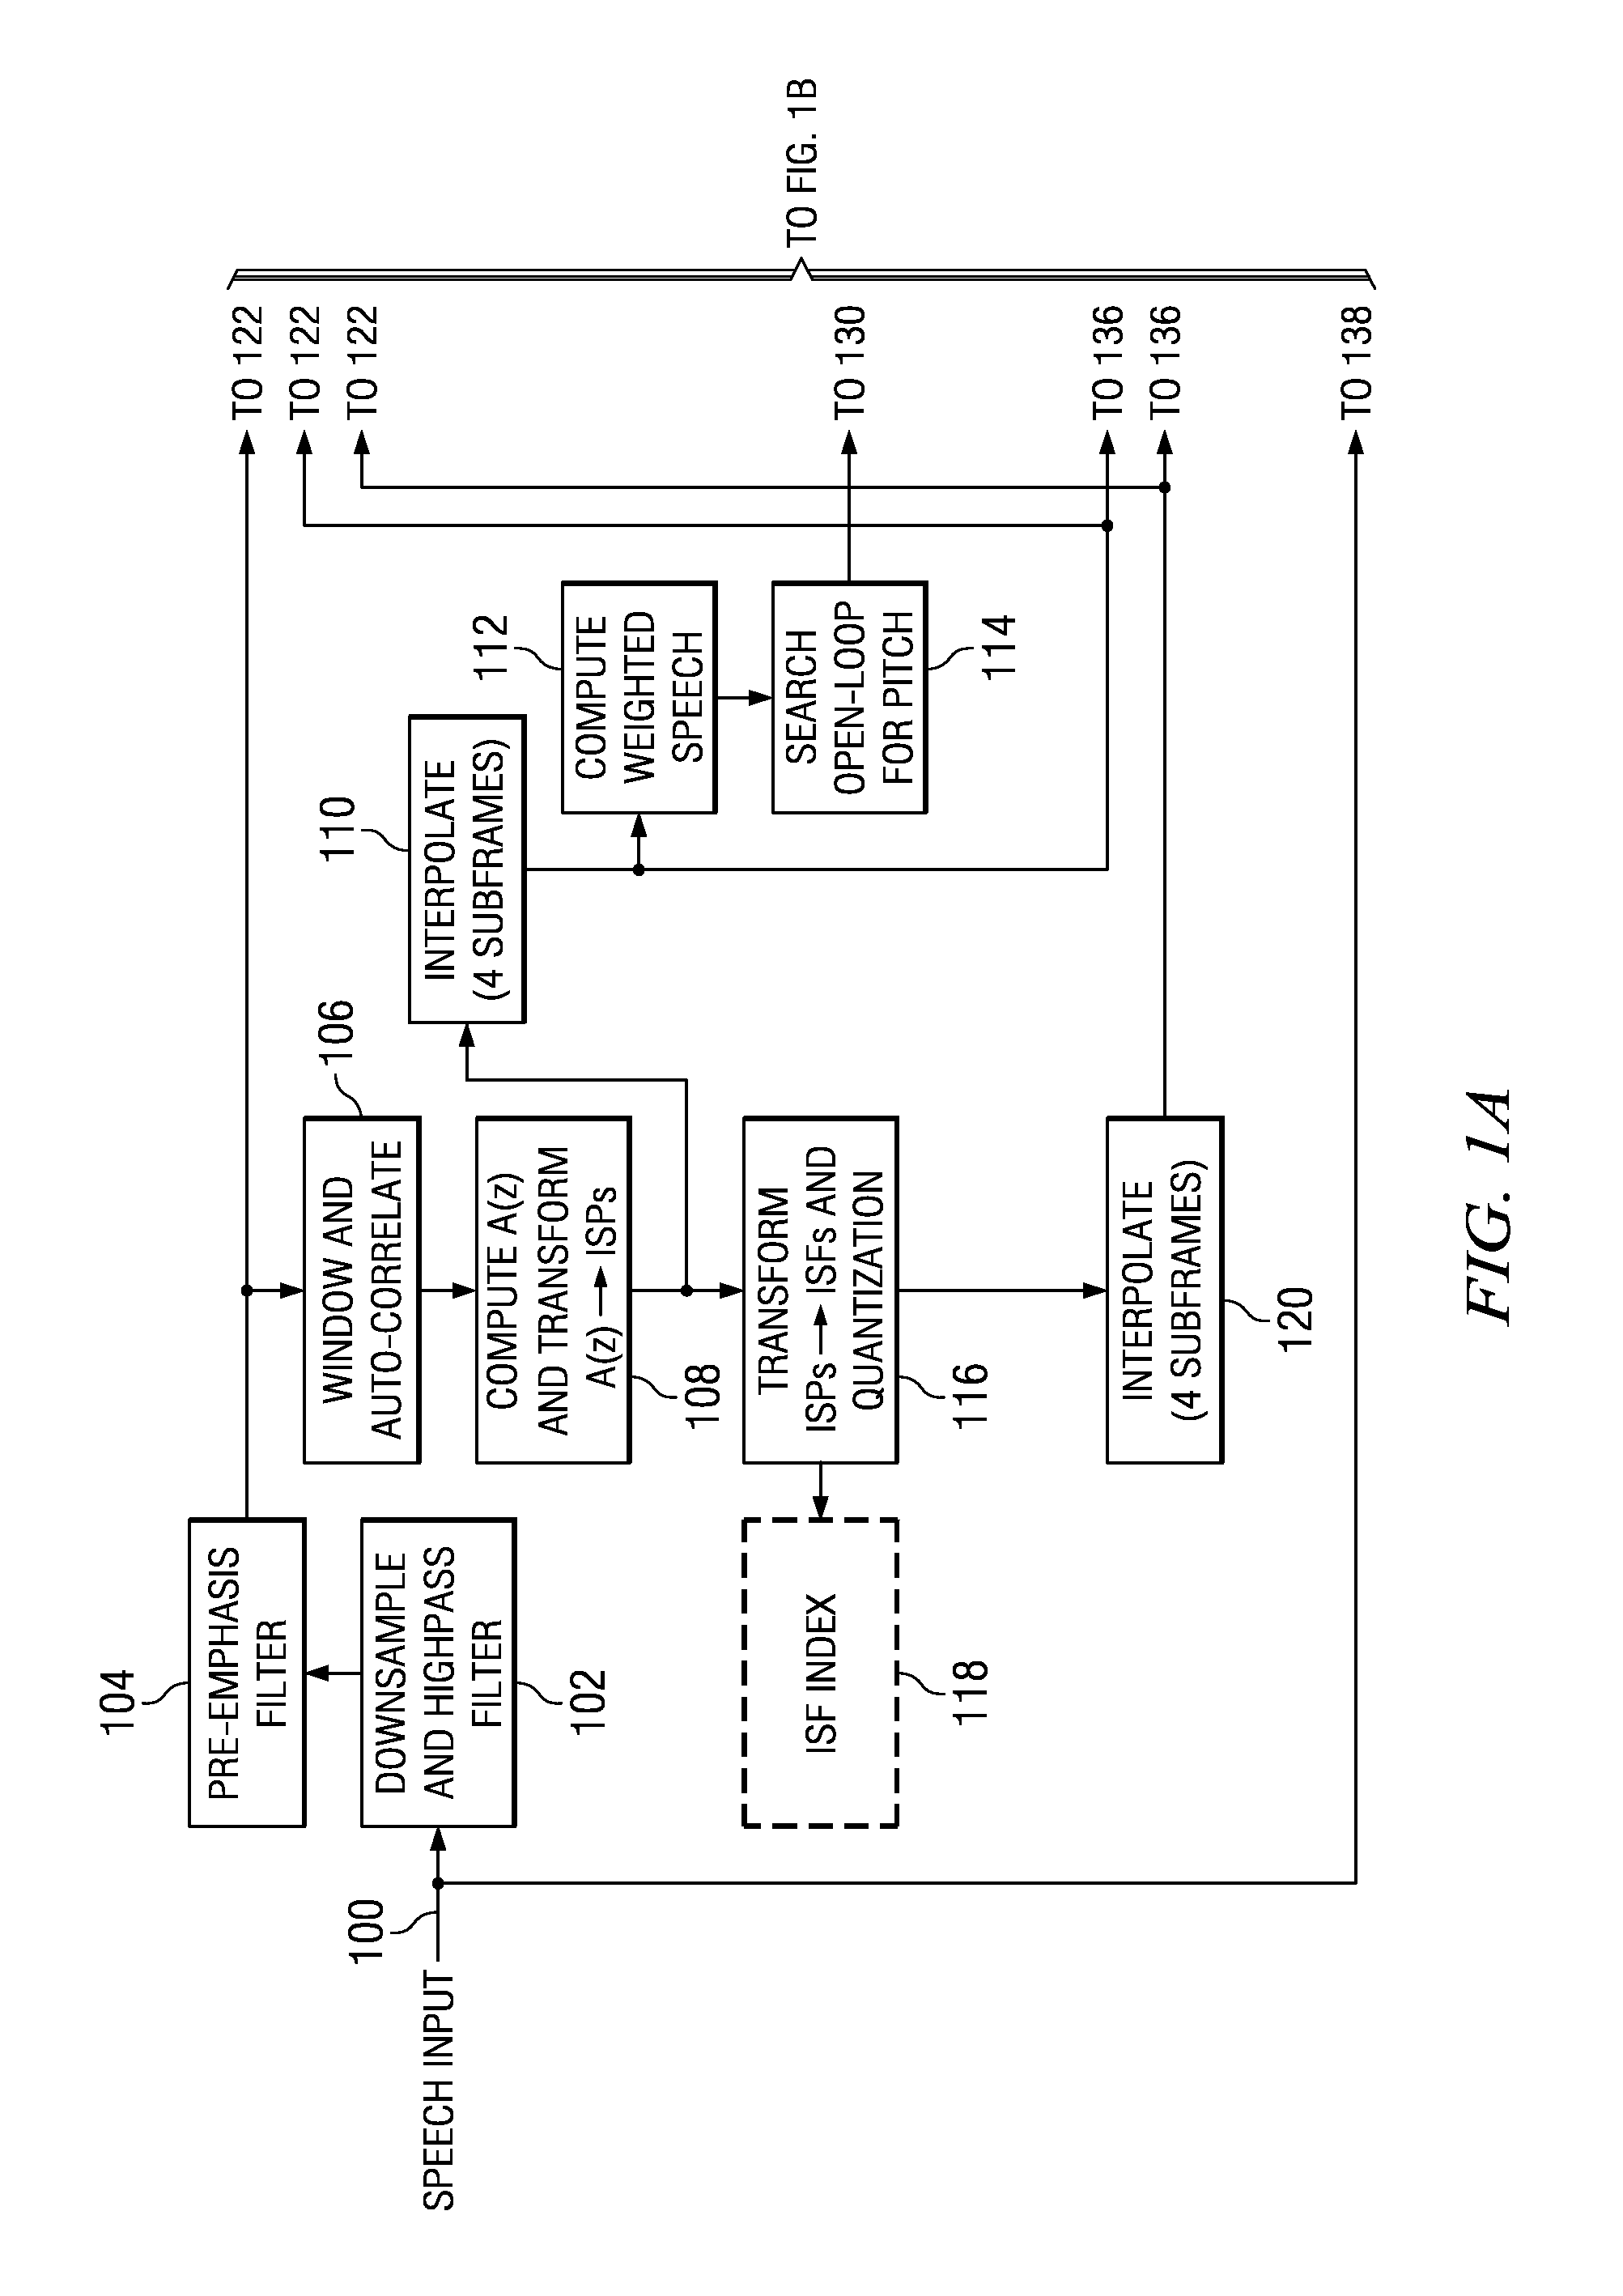 Method and system for reducing frame erasure related error propagation in predictive speech parameter coding